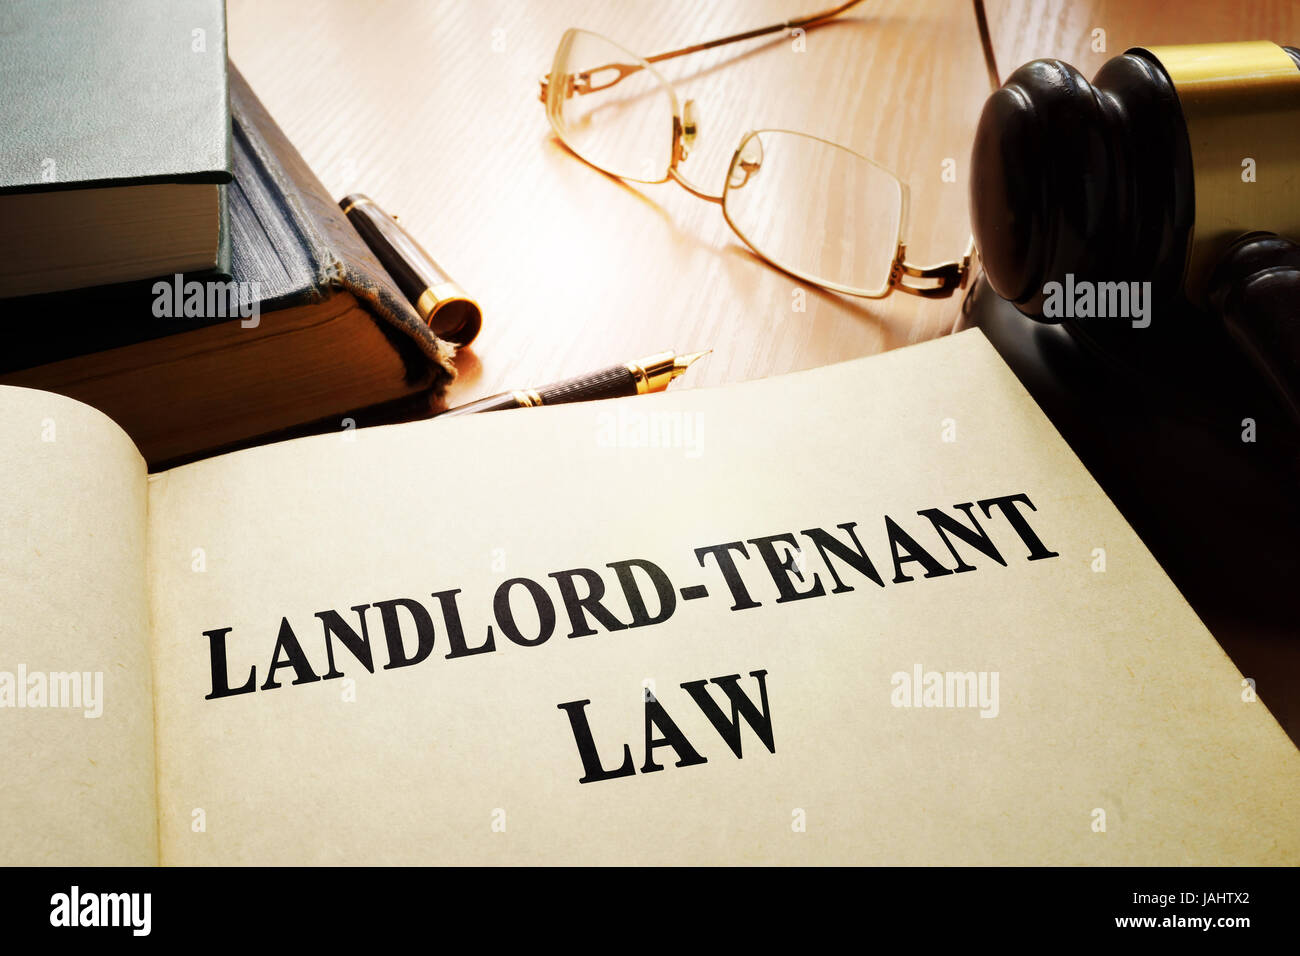 Landlord-tenant law on an office table. Stock Photo